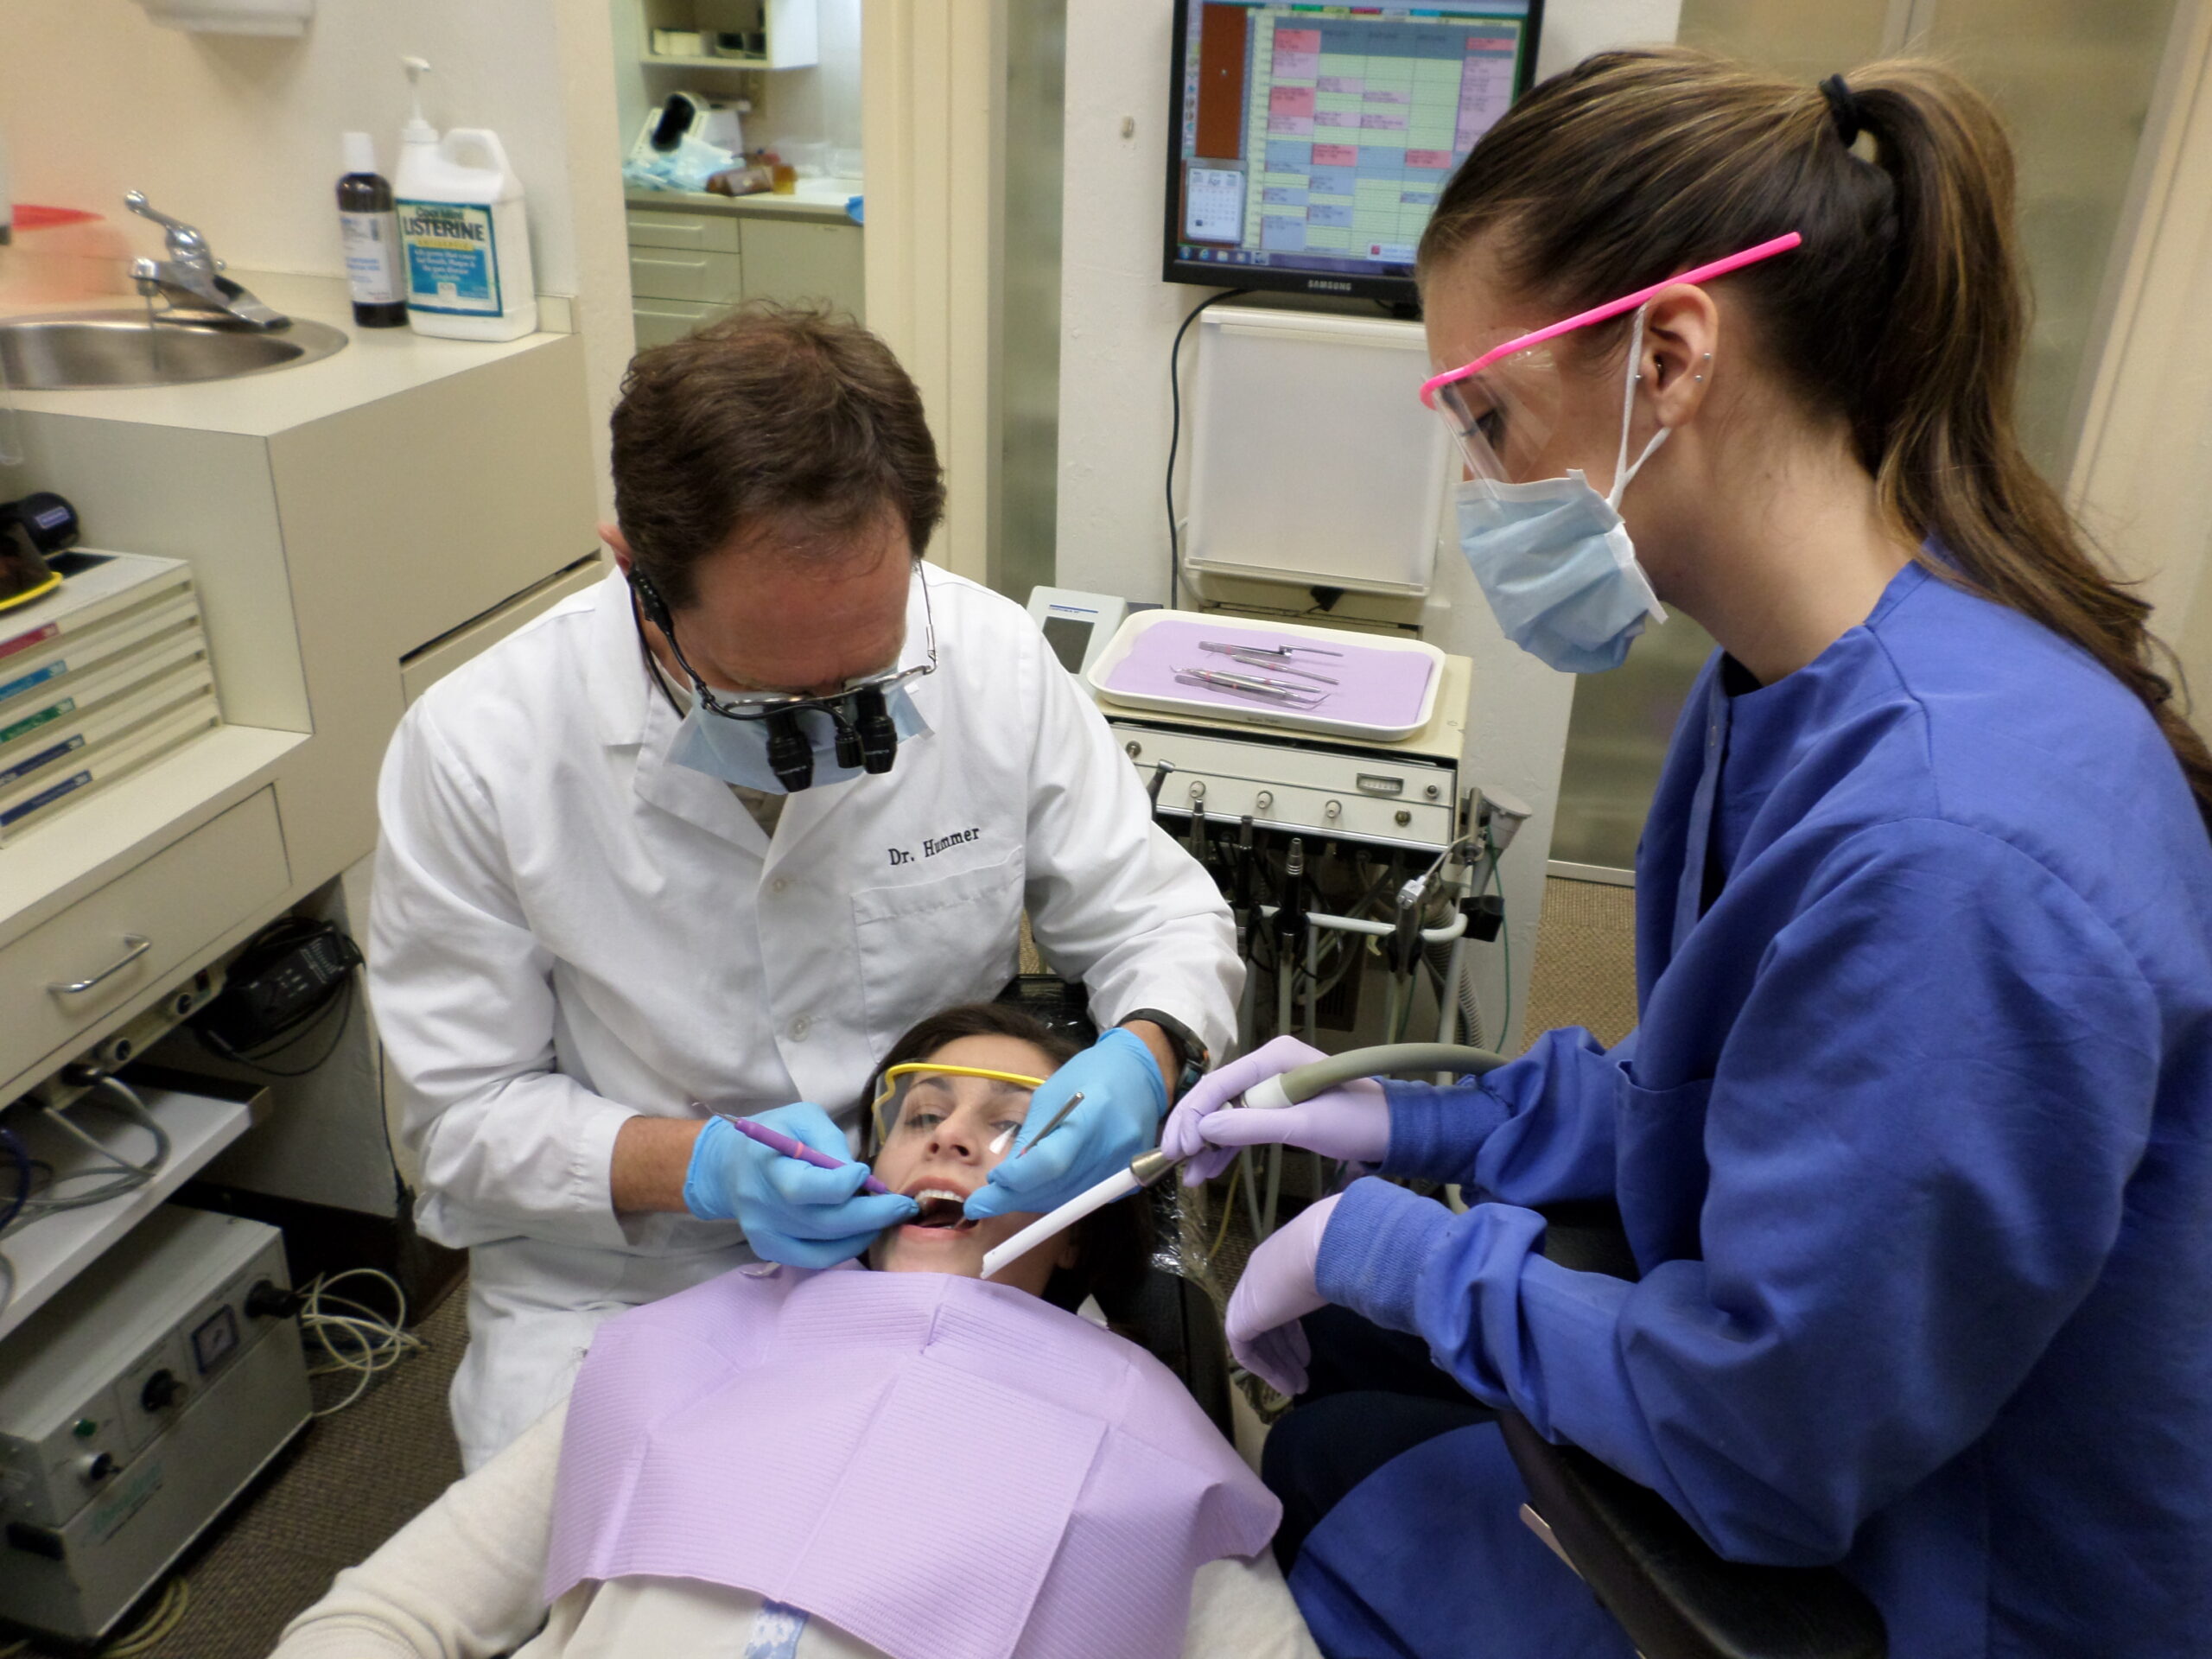 dentist and hygienist caring for a patient